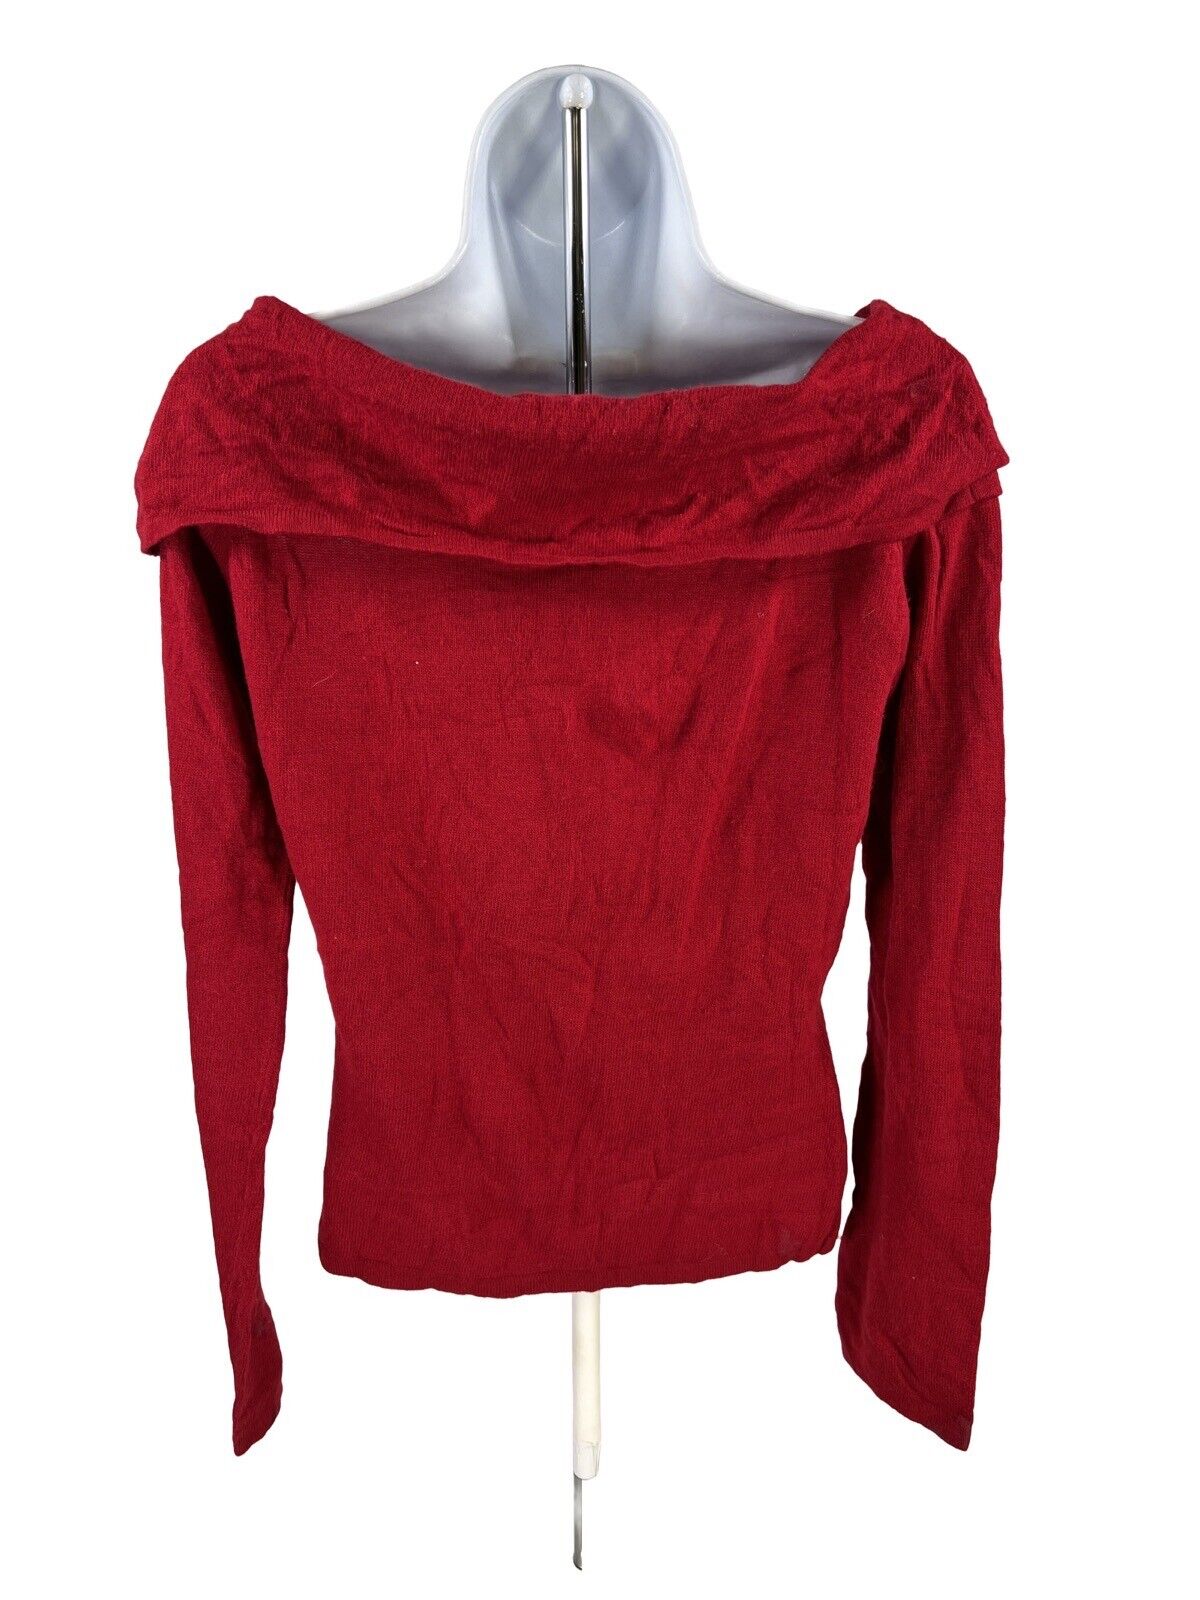 NEW Karen Kane Women's Red Embroidered Off The Shoulder Sweater - L